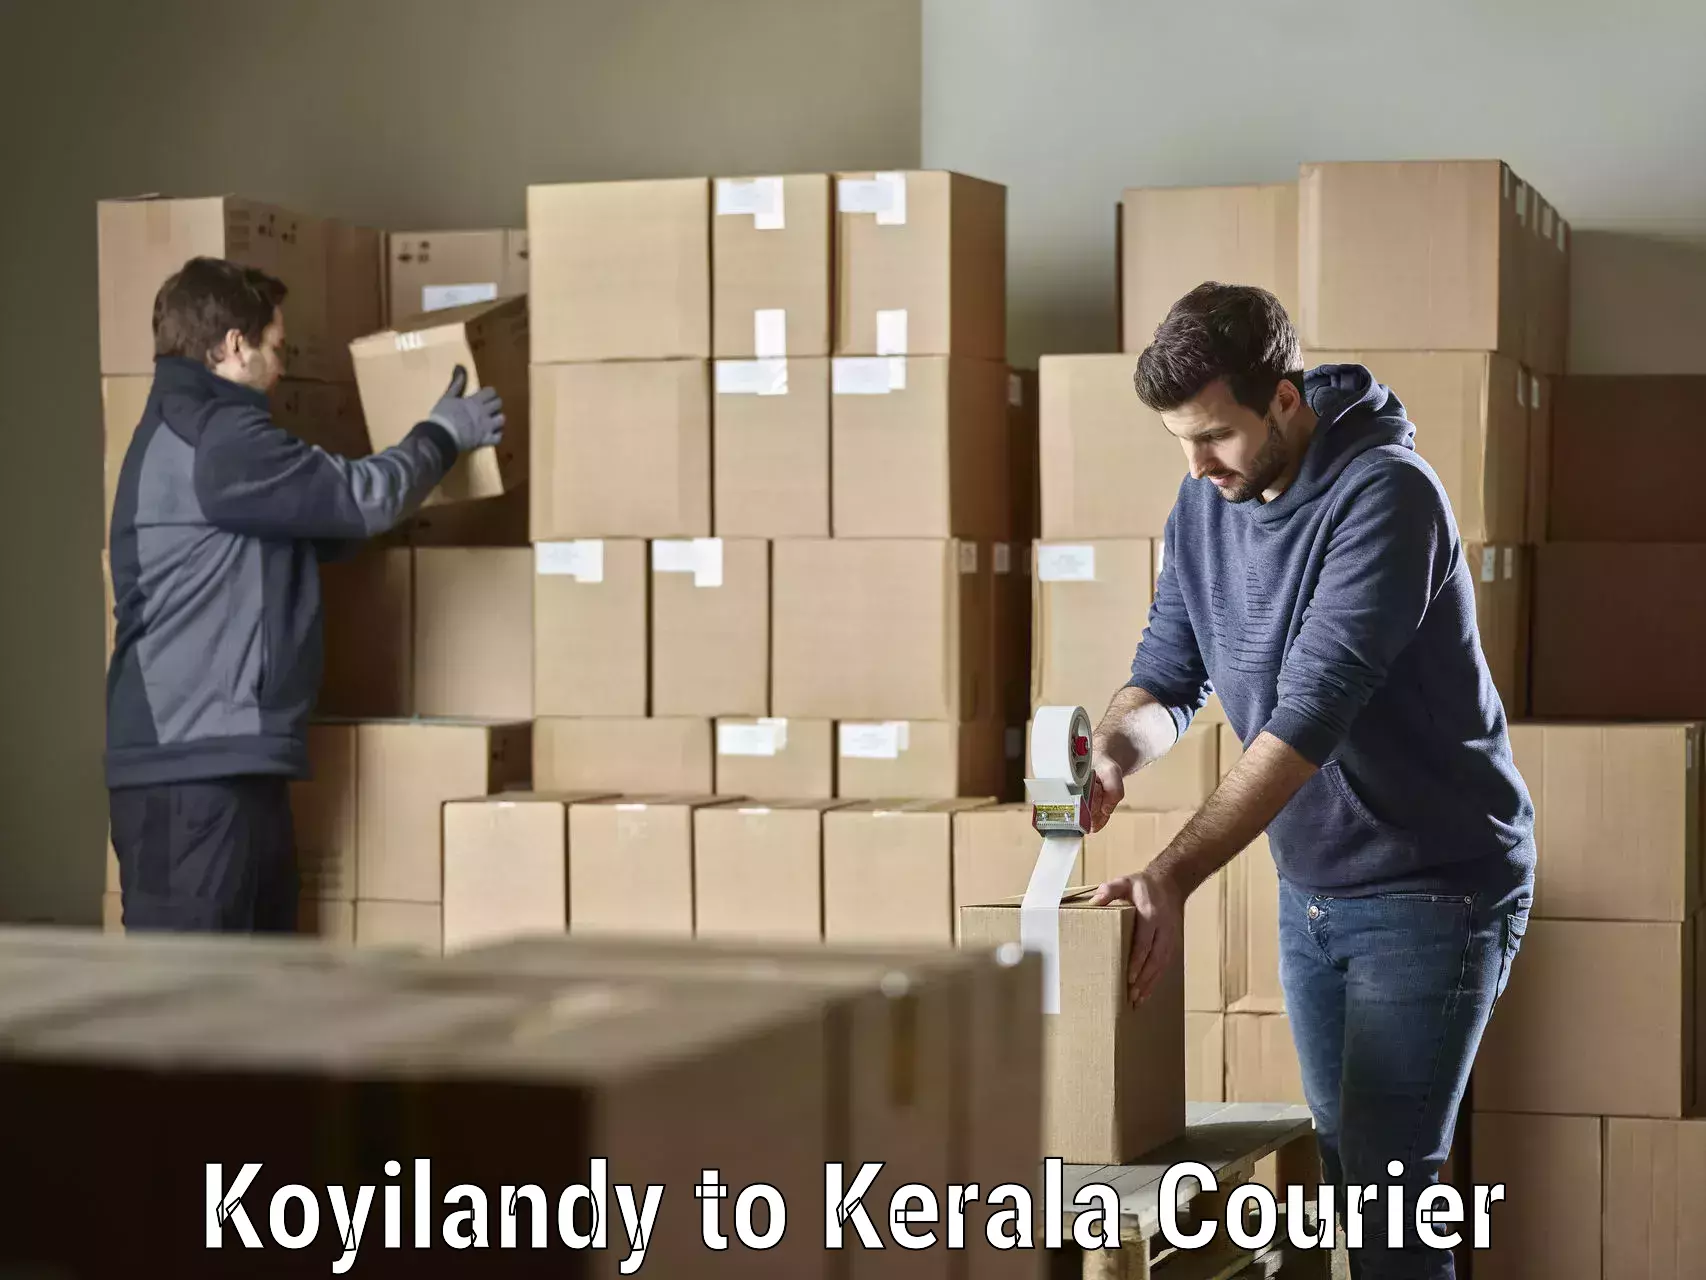 Courier service innovation in Koyilandy to Mahe